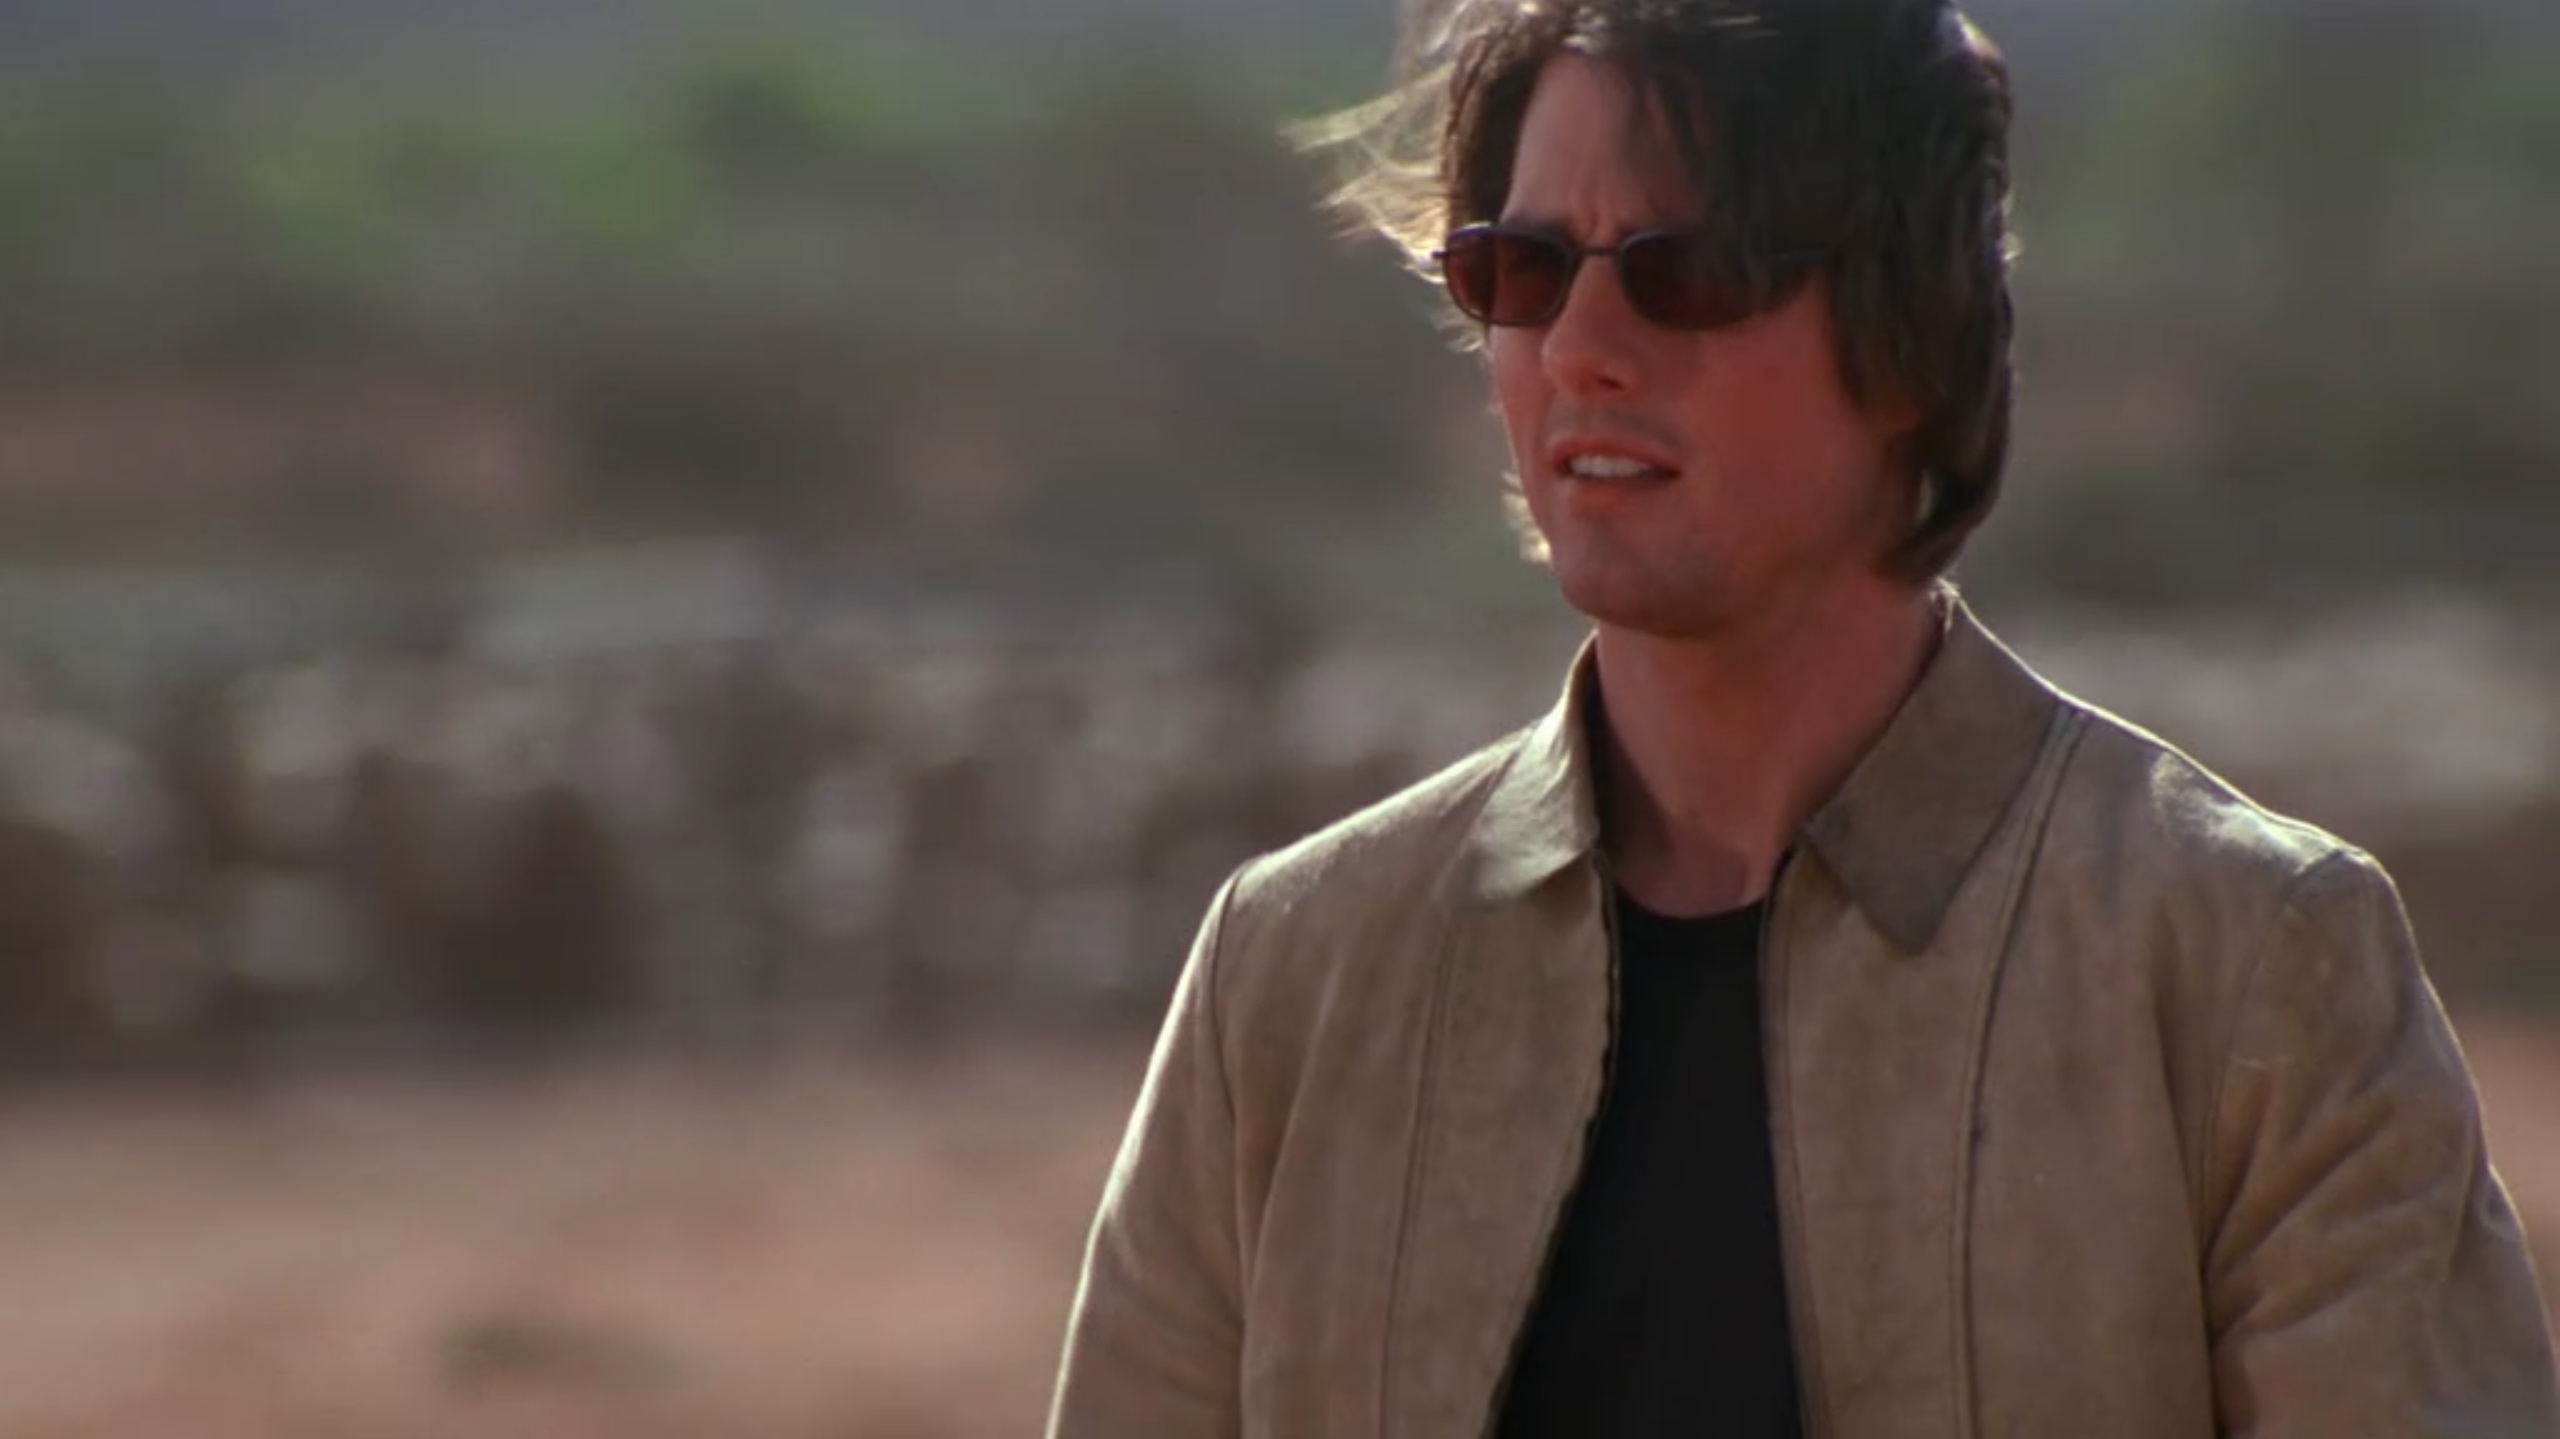 sunglasses tom cruise mission impossible